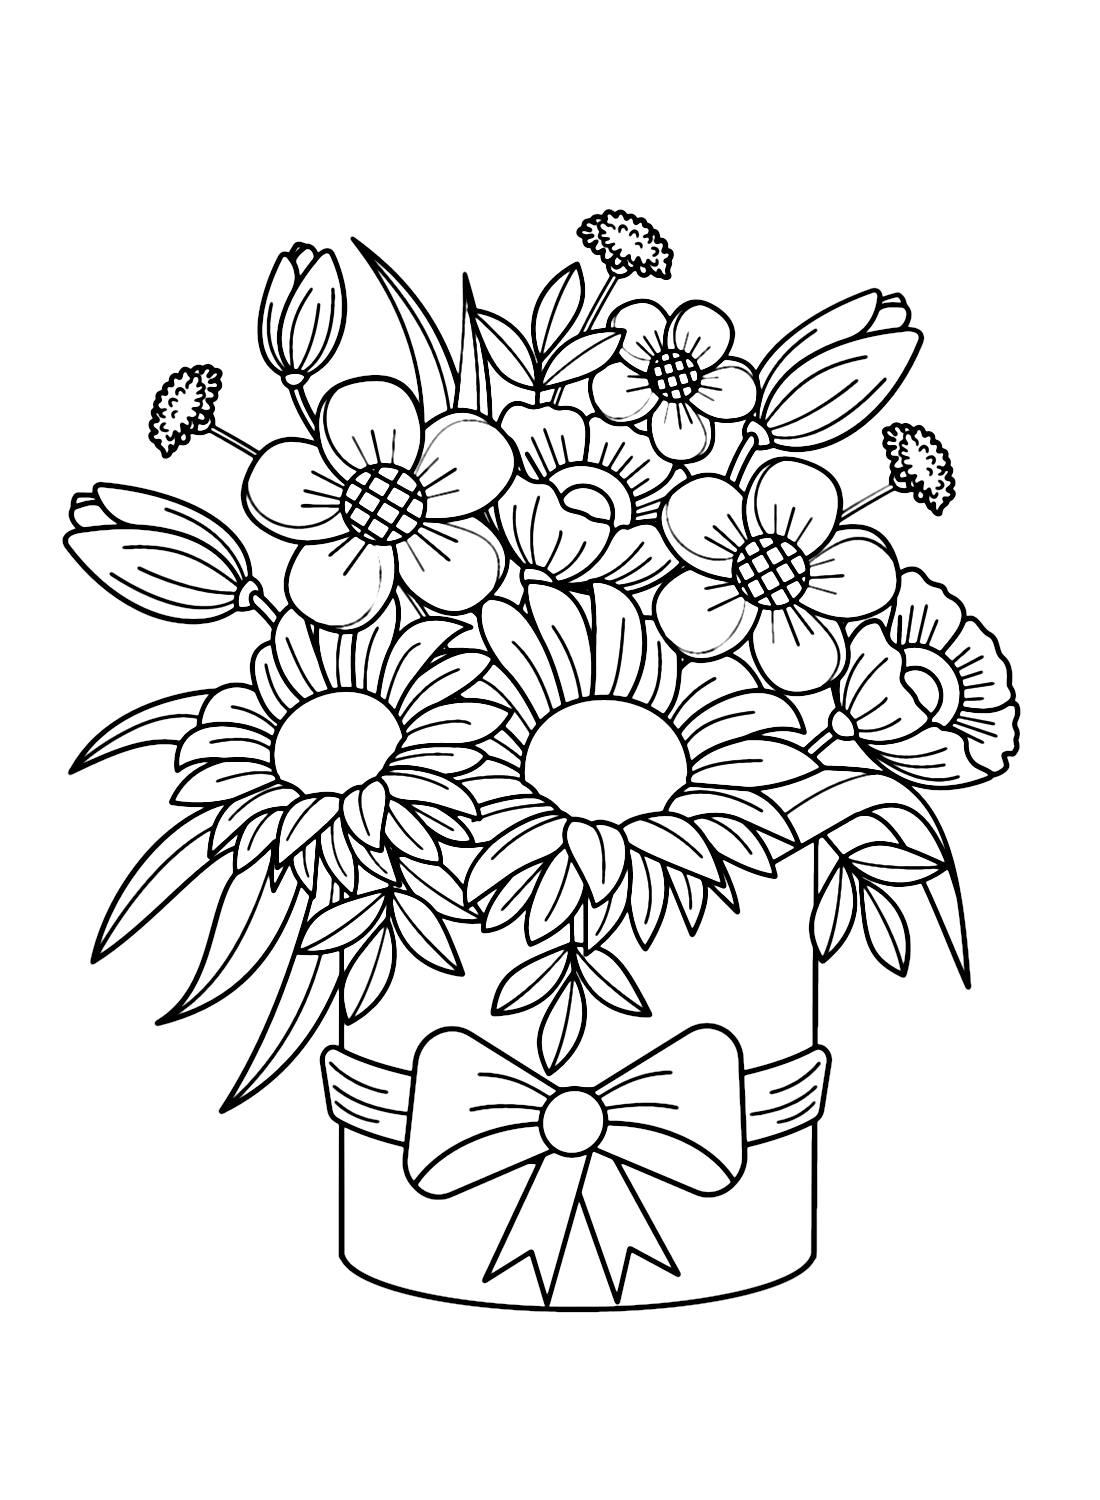 Basket Flowers Coloring Page